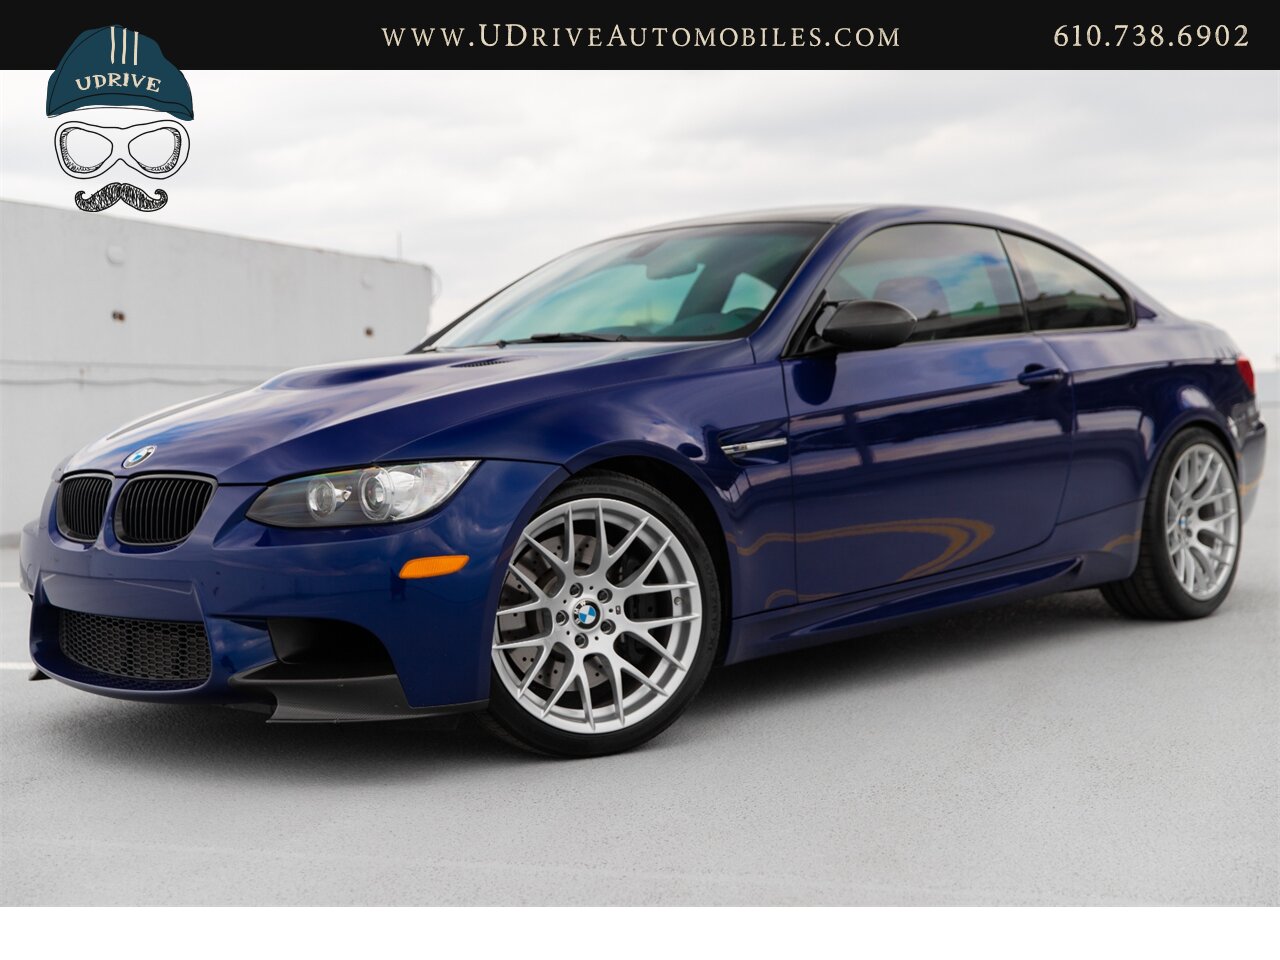 2011 BMW M3 E92 6 Speed Manual Competition Pkg Interlagos Blue  16k Miles Nav PDC EDC Comf Acc - Photo 1 - West Chester, PA 19382